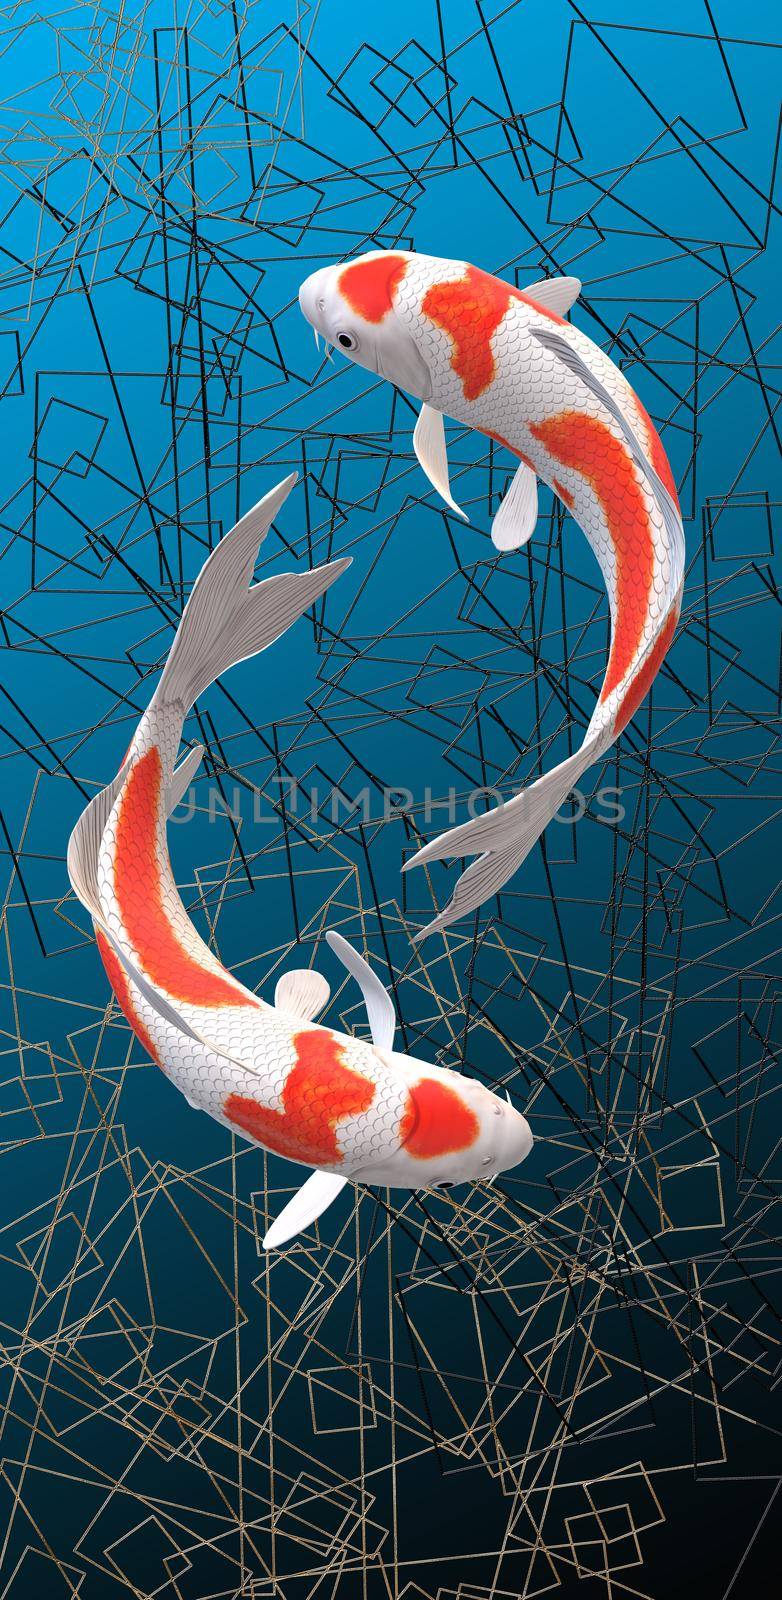 Abstract koi fish on blue water background by NelliPolk